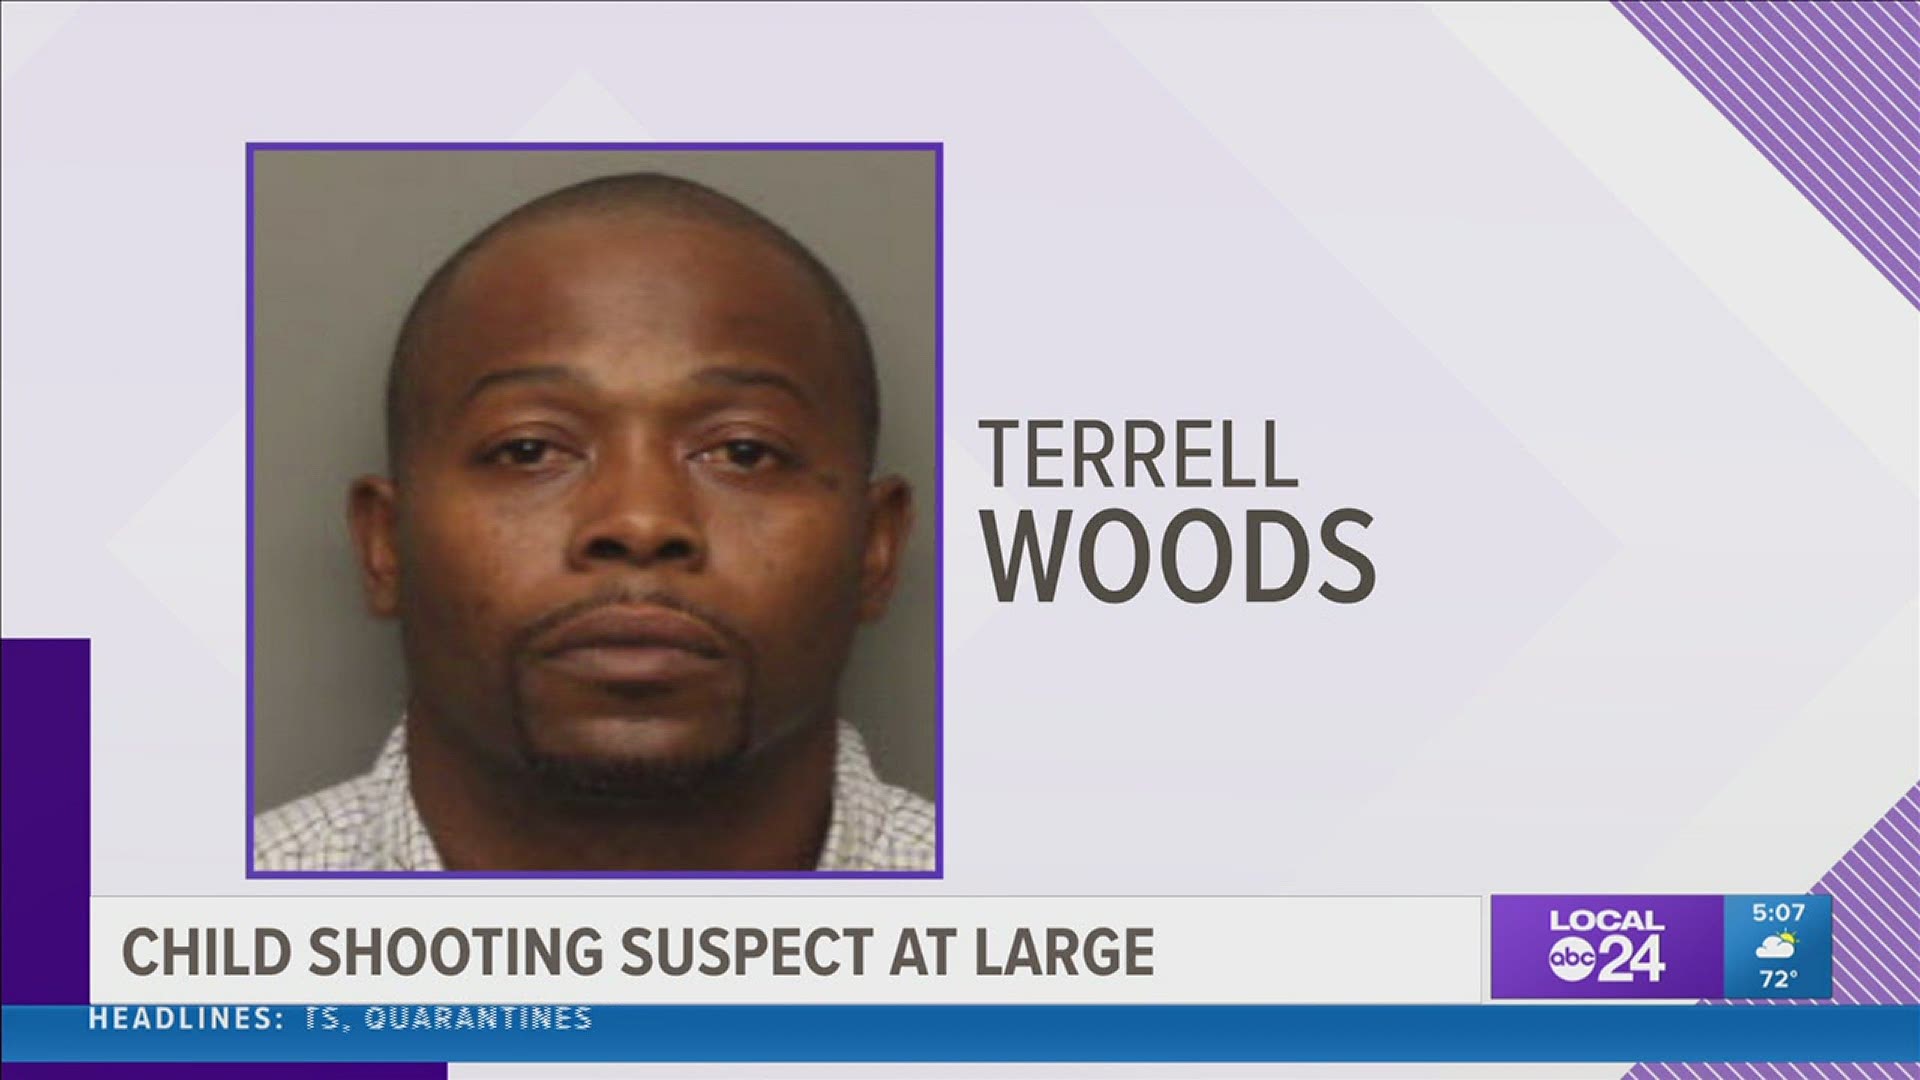 If you know the whereabouts of Terrell Woods, you are asked to call Crime Stoppers at 901-528-CASH.